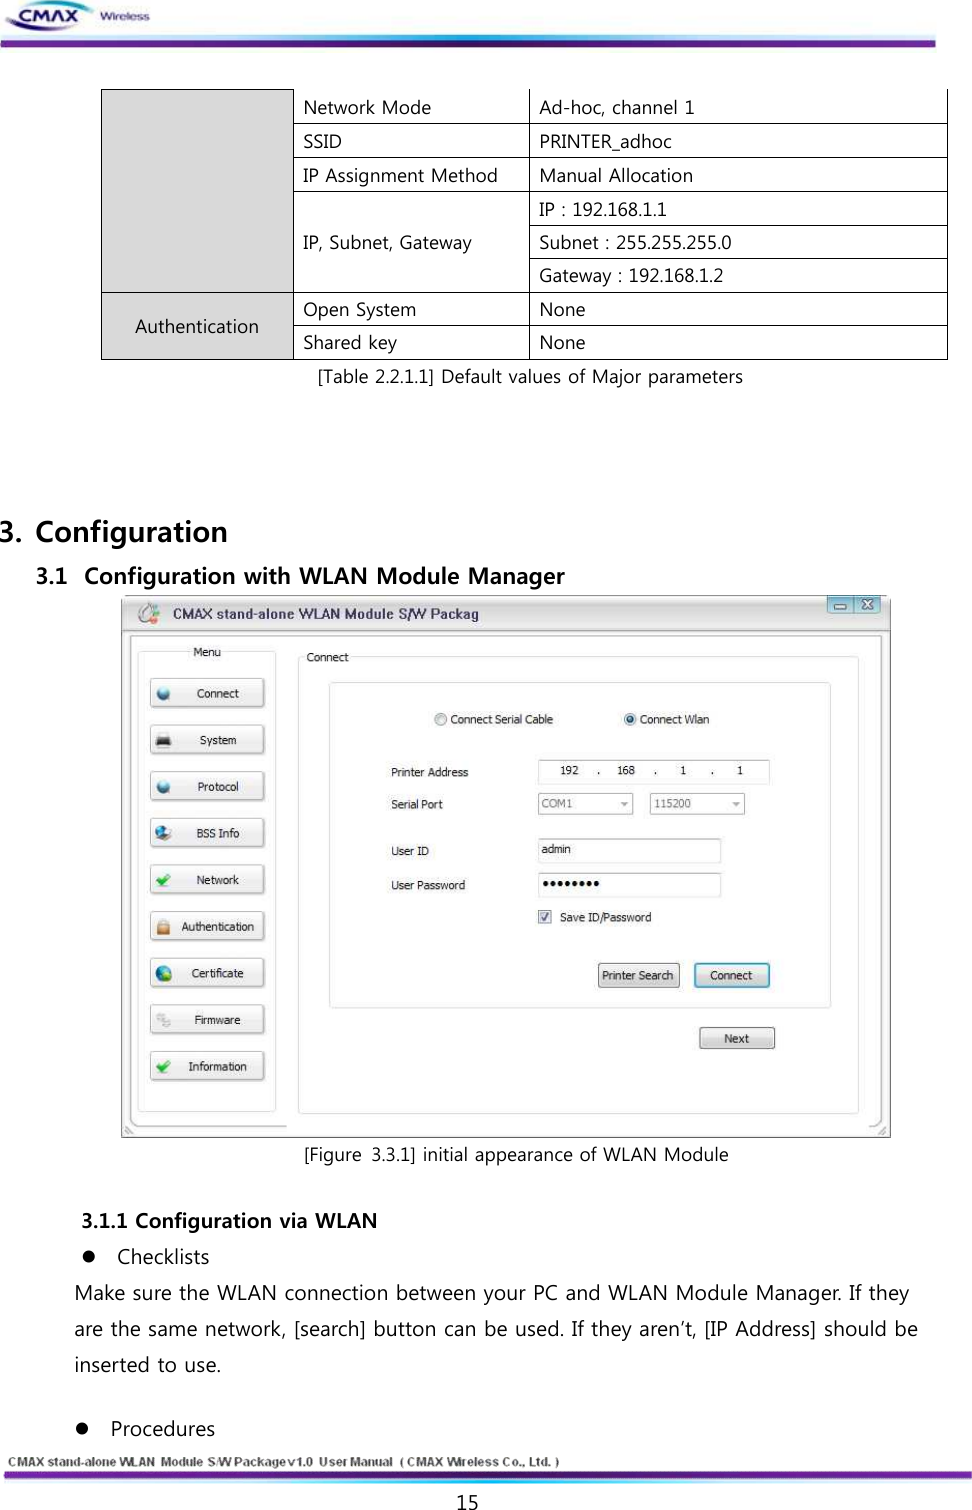   15  www.cmaxwireless.co.kr Network Mode Ad-hoc, channel 1 SSID PRINTER_adhoc IP Assignment Method Manual Allocation IP, Subnet, Gateway IP : 192.168.1.1 Subnet : 255.255.255.0 Gateway : 192.168.1.2 Authentication Open System None Shared key None [Table 2.2.1.1] Default values of Major parameters     3. Configuration 3.1   Configuration with WLAN Module Manager  [Figure 3.3.1] initial appearance of WLAN Module  3.1.1 Configuration via WLAN   l Checklists   Make sure the WLAN connection between your PC and WLAN Module Manager. If they are the same network, [search] button can be used. If they aren’t, [IP Address] should be inserted to use.  l Procedures   